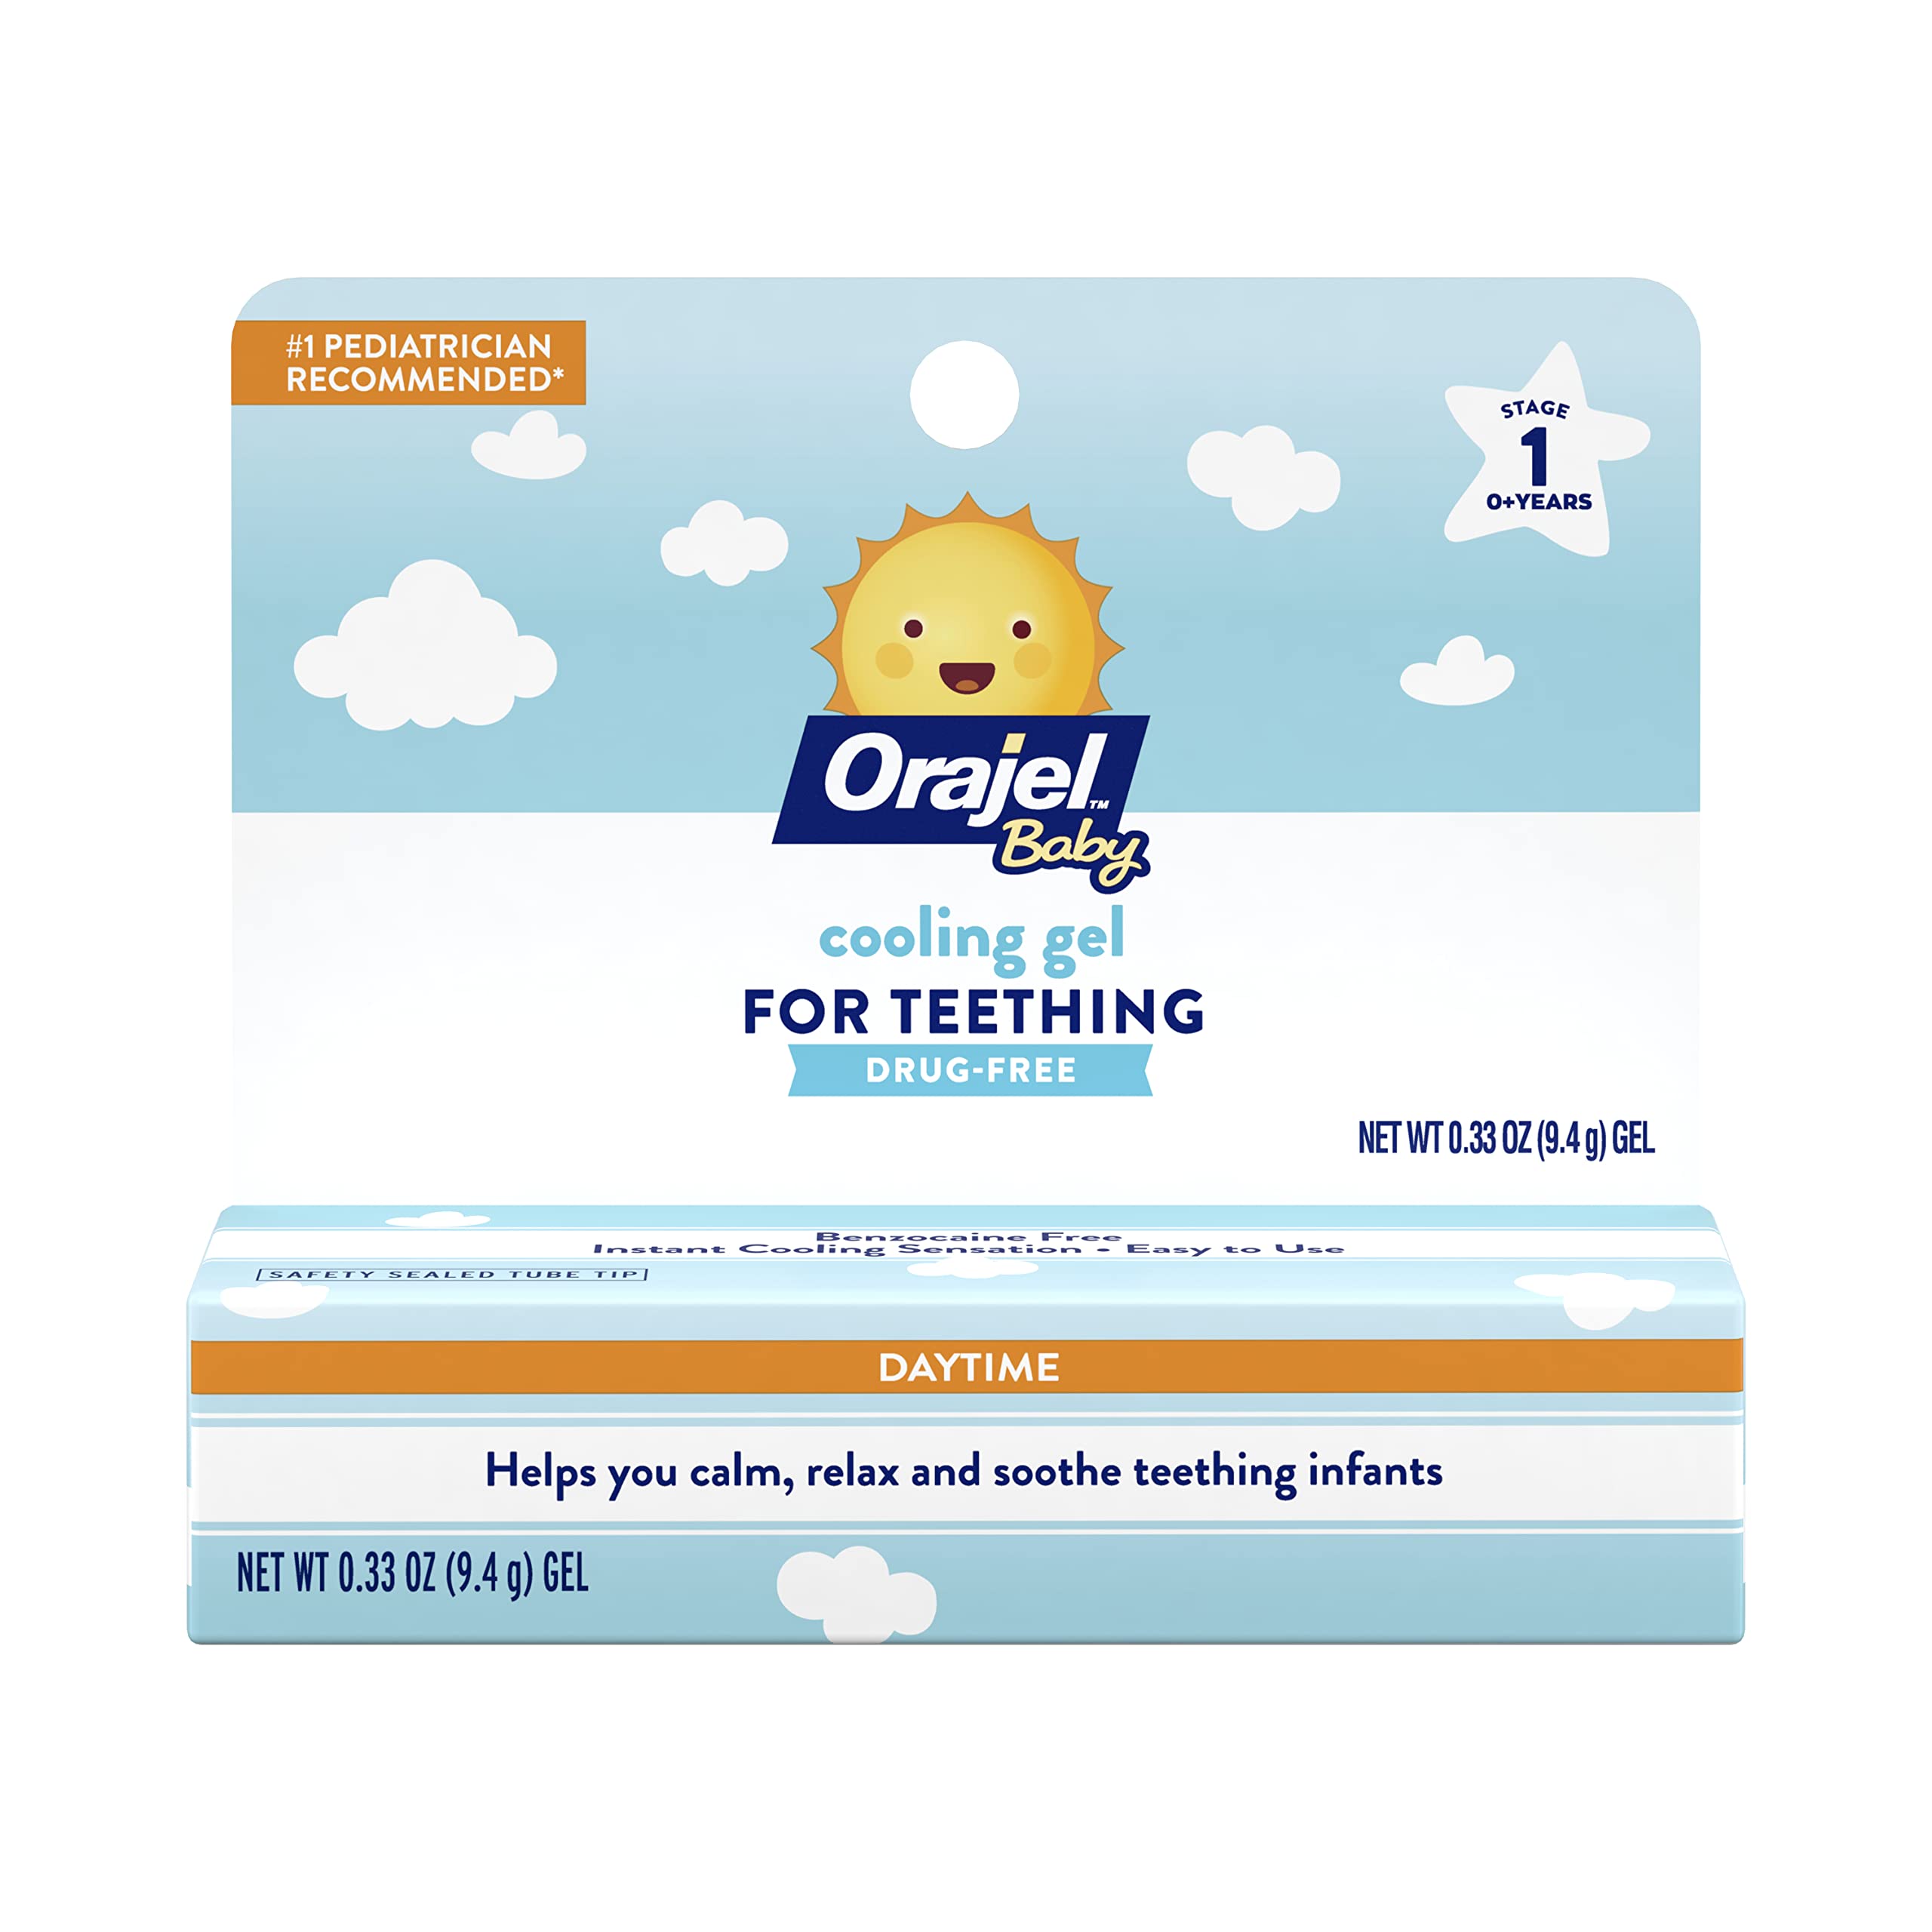 Orajel Baby Daytime Cooling Gel for Teething, Drug-Free, 1 Pediatrician Recommended Brand for Teething*, One .33oz Tube